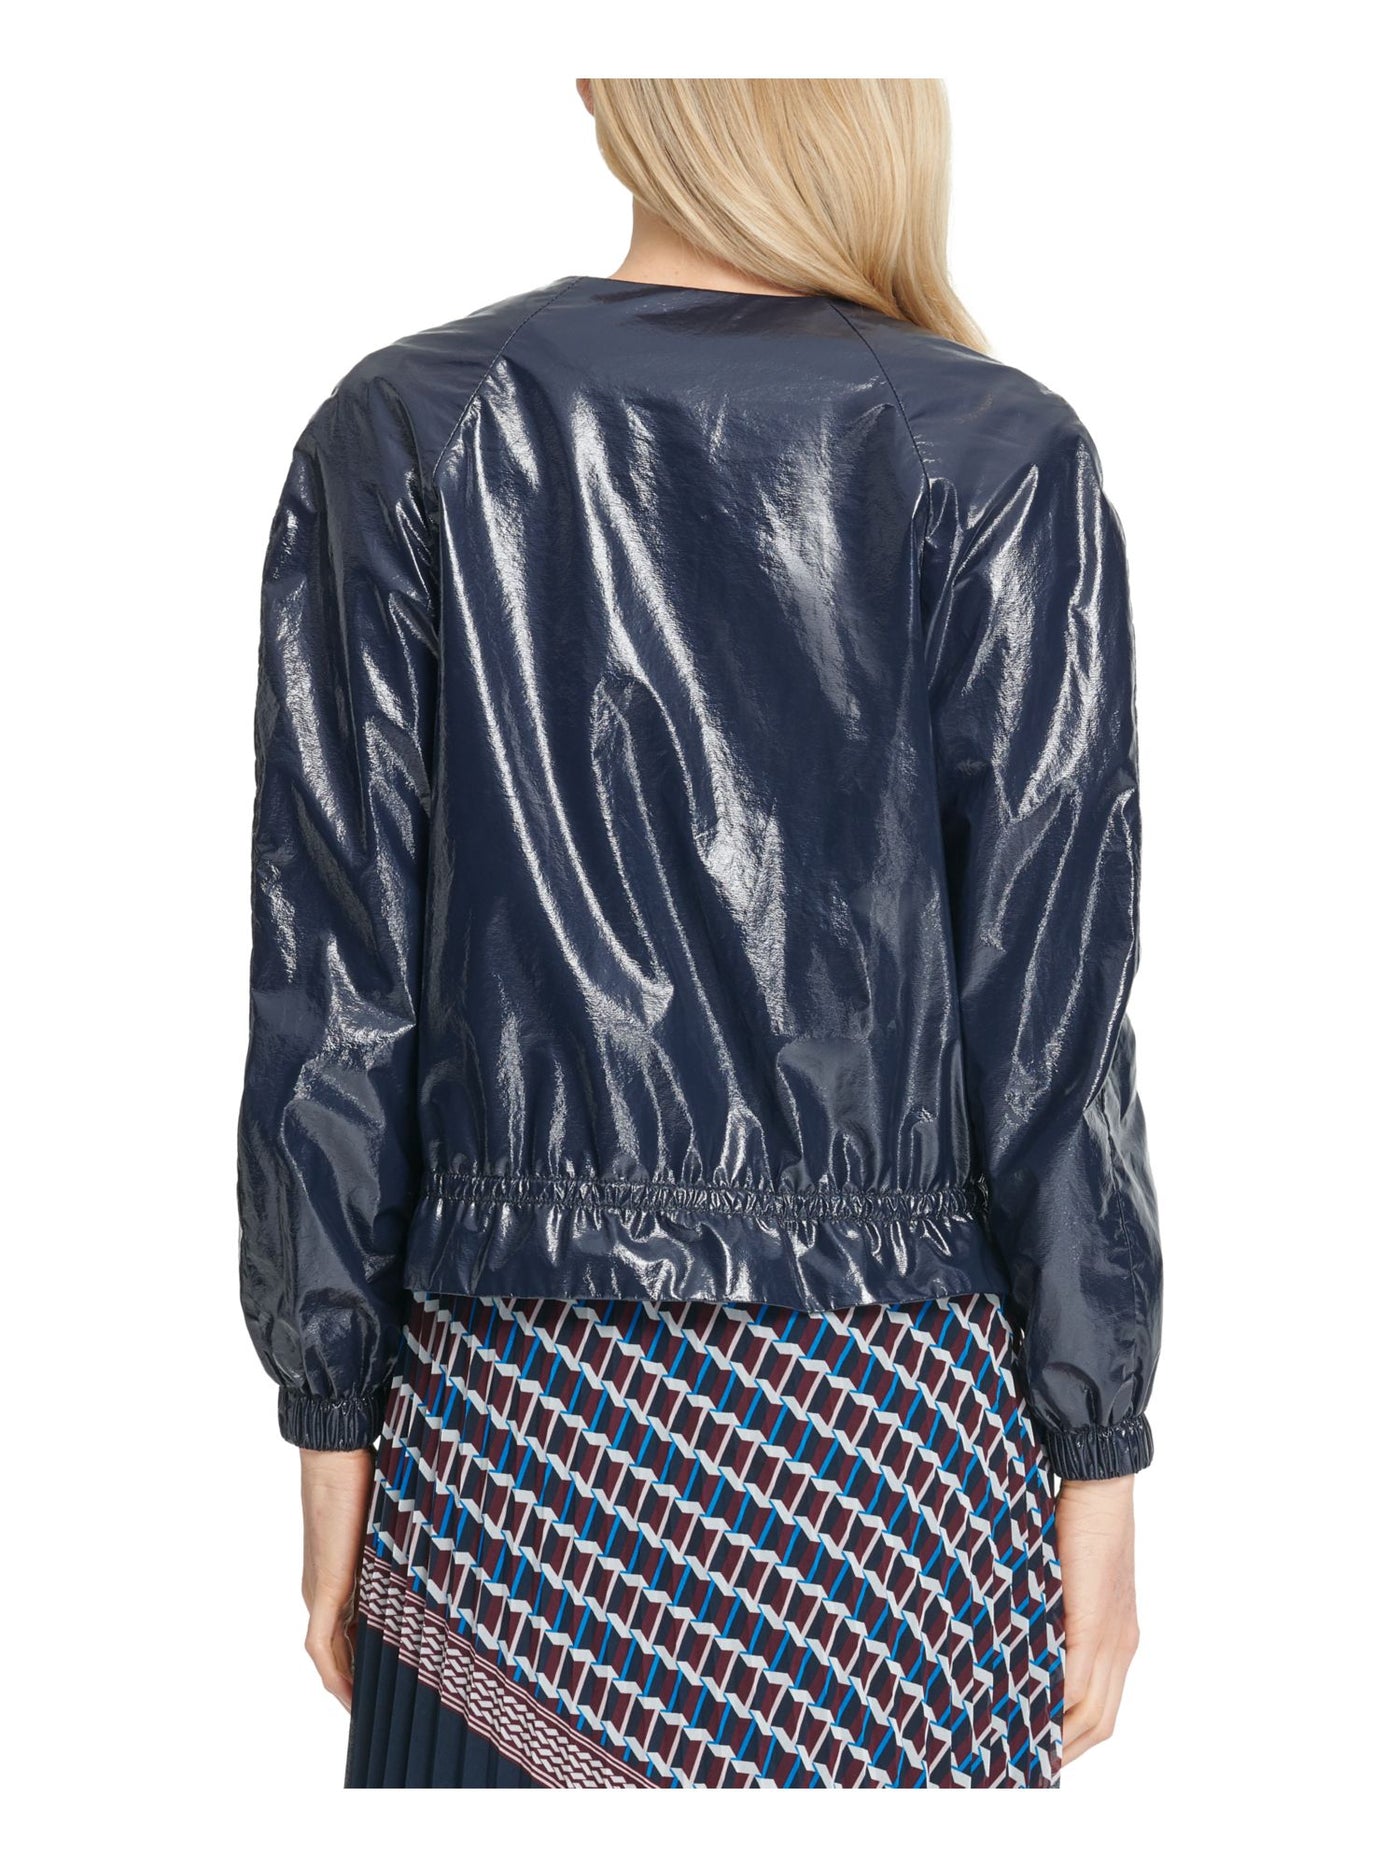 DKNY Womens Faux Leather Bomber Jacket